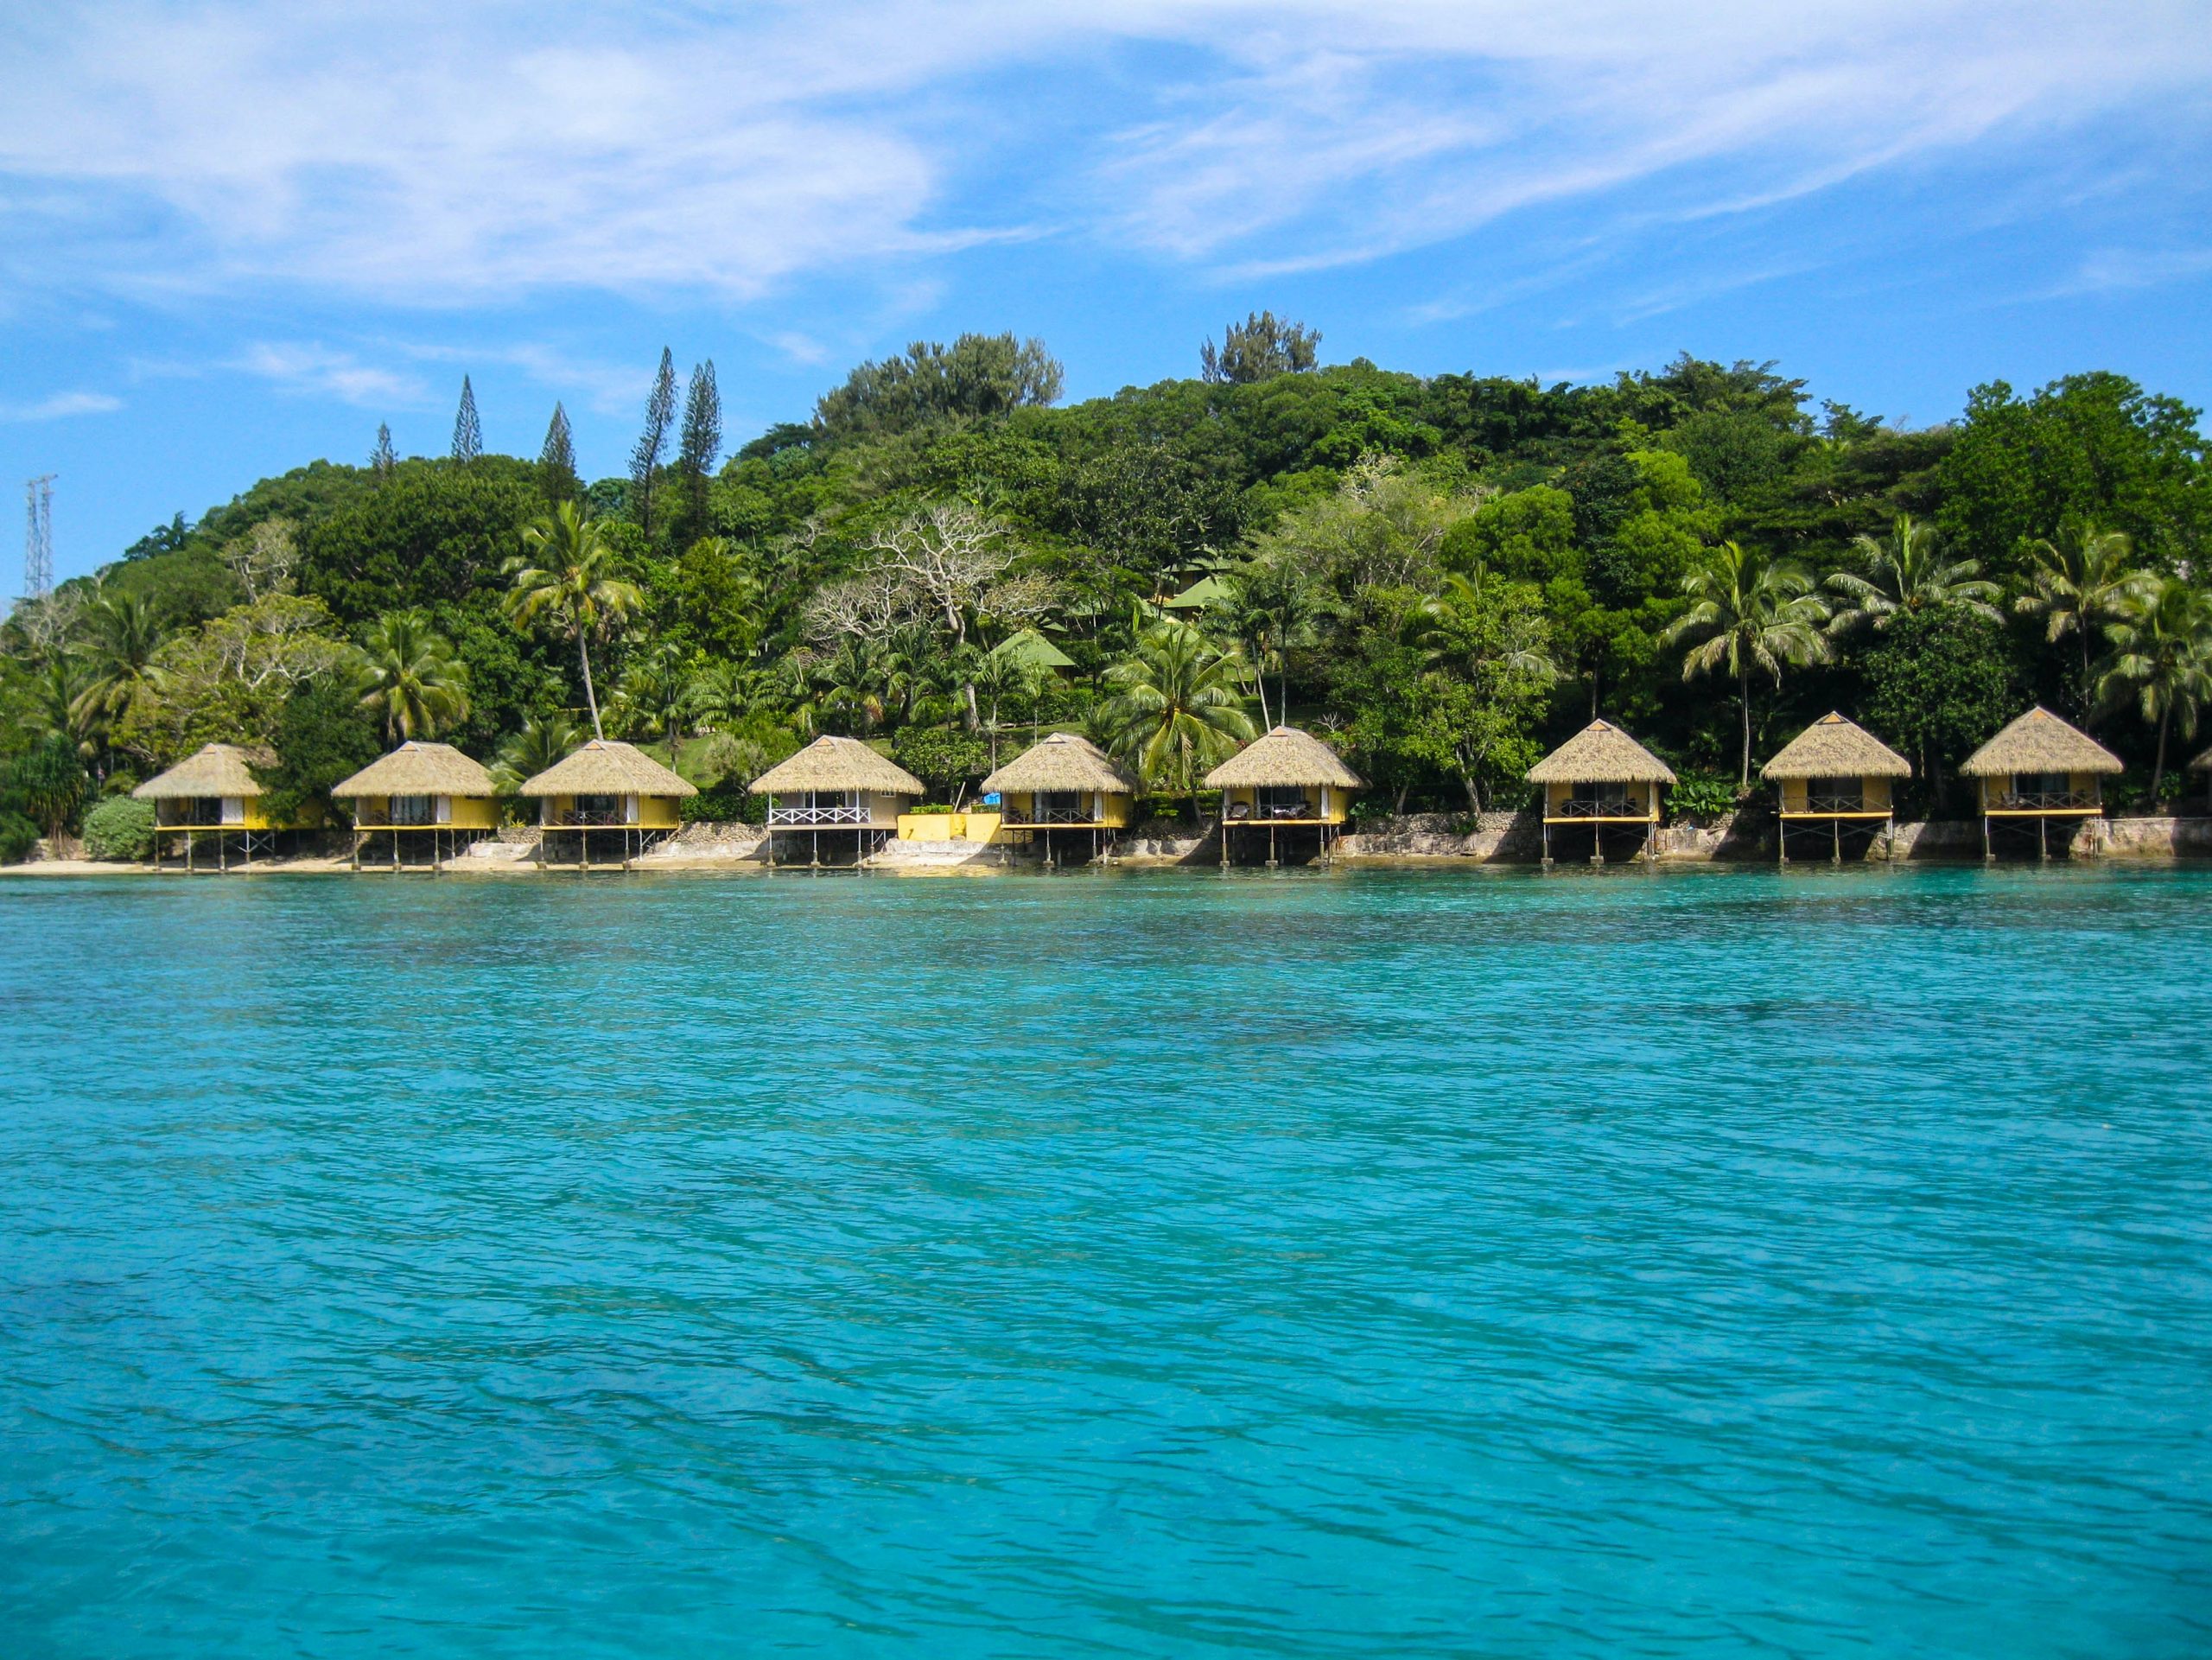 When Is The Best Time To Visit Vanuatu?